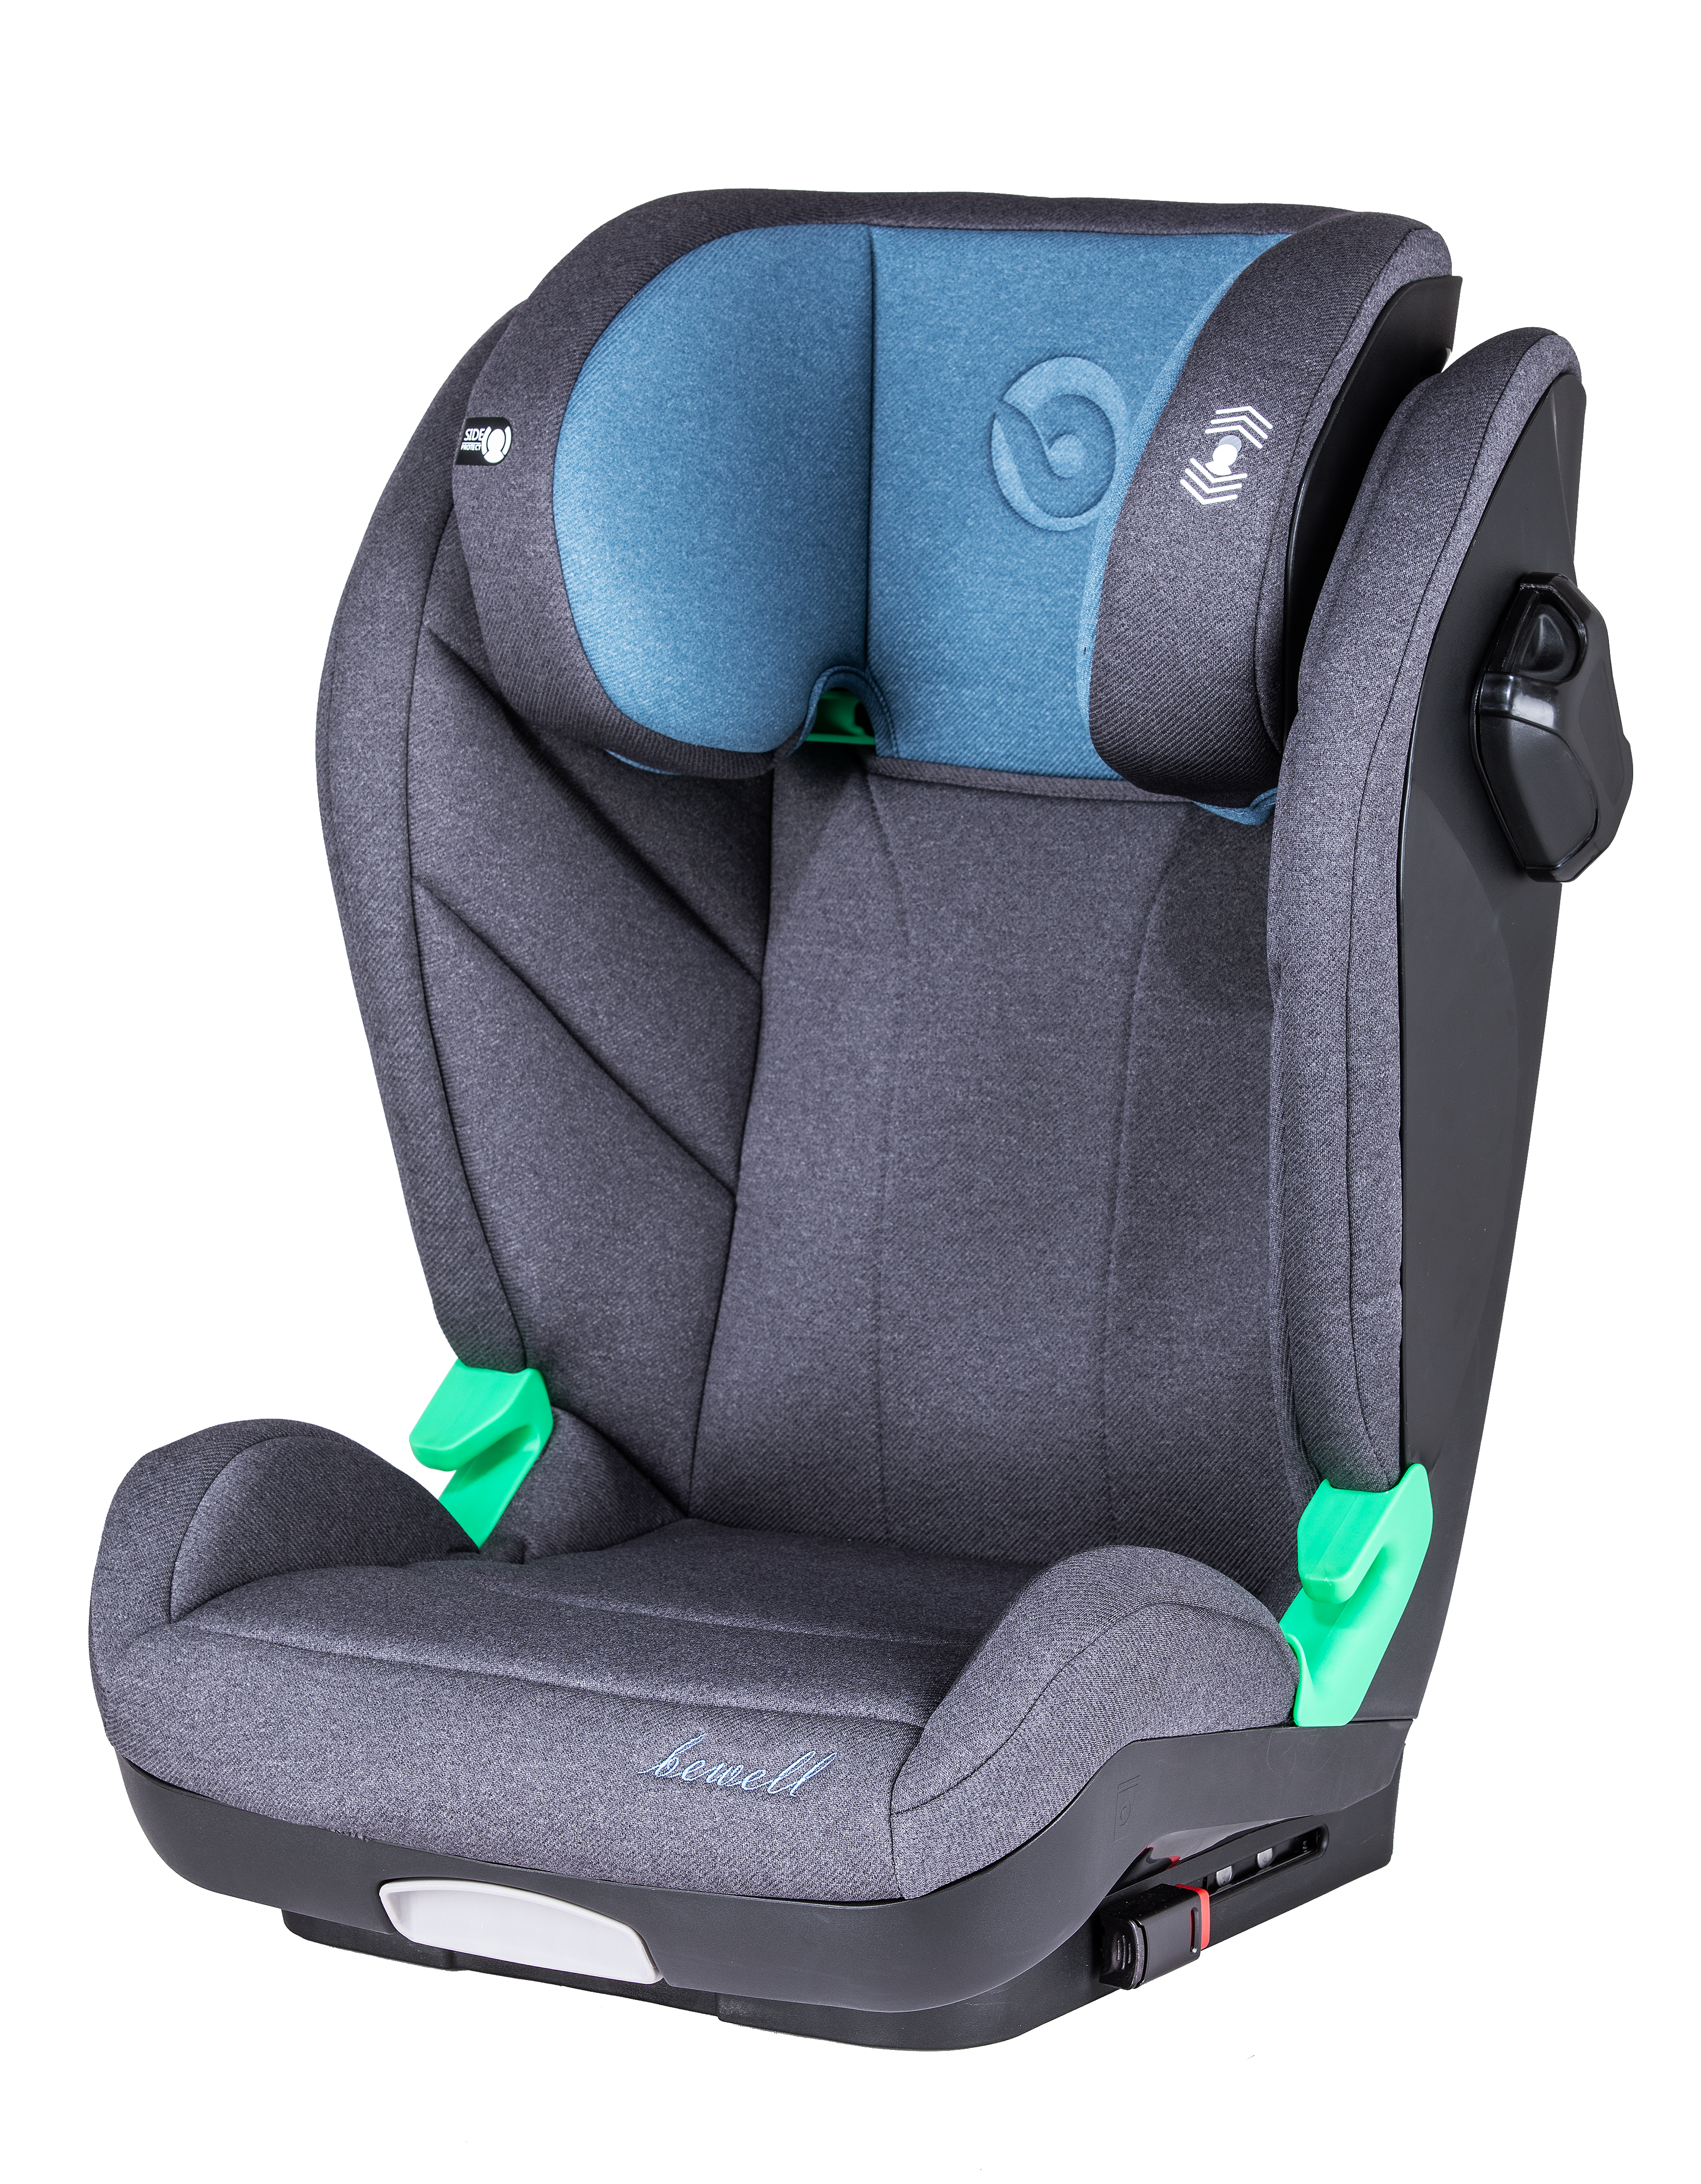 Side Impact Protection I-Size Safety Baby Car Seat